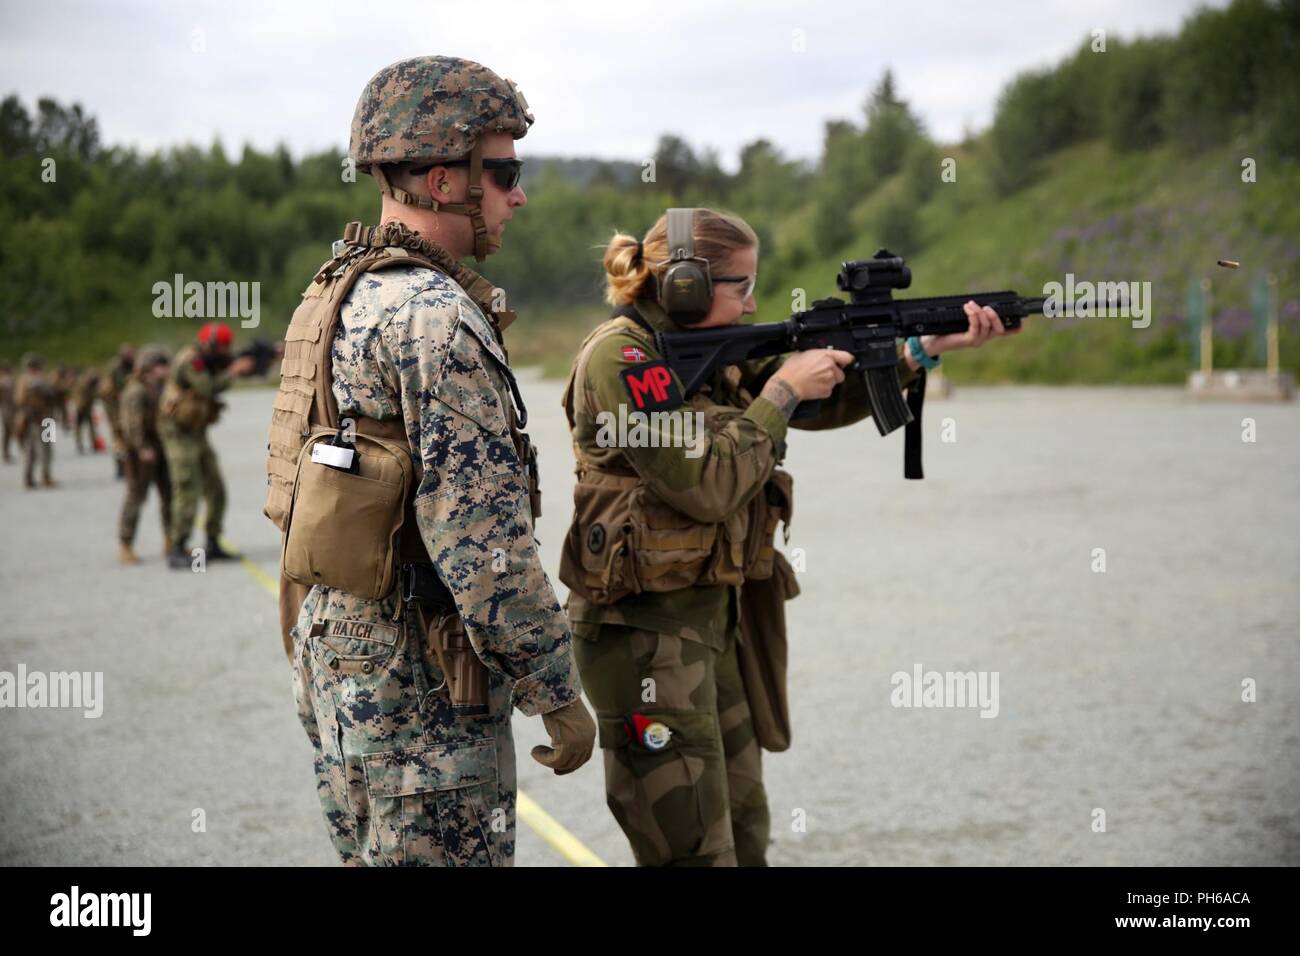 A U.S. Marine with Marine Rotational Force-Europe 18.1 coaches a Norwegian military policeman during a weapon transition range at Leksdal Skytefelt Training Complex, Norway, June 27, 2018. The multinational training allowed the service members to cross-train with American and Norwegian weapon systems including assault rifles, shotguns, and pistols. The Marines and Norwegian soldiers practiced firing from behind barricades and transitioning between weapon systems. Stock Photo